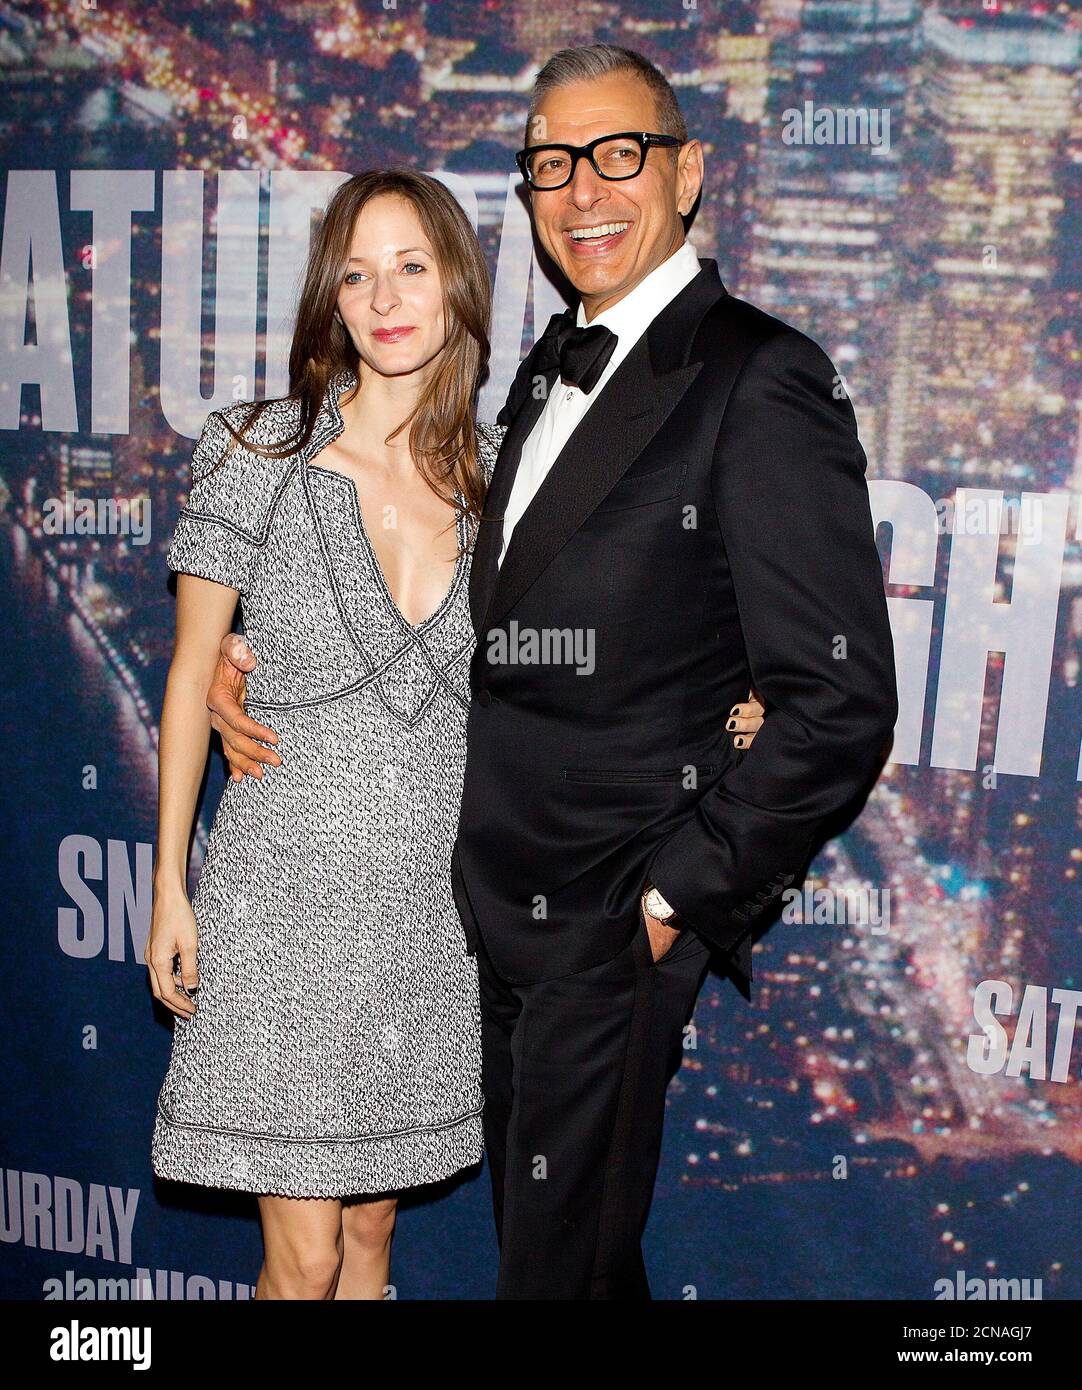 Actor Jeff Goldblum and his wife Emilie Livingston arrive for the 40th Anniversary Saturday Night Live (SNL) broadcast in the Manhattan borough of New York, February 15, 2015.       REUTERS/Carlo Allegri   (UNITED STATES - Tags: ENTERTAINMENT) Stock Photo